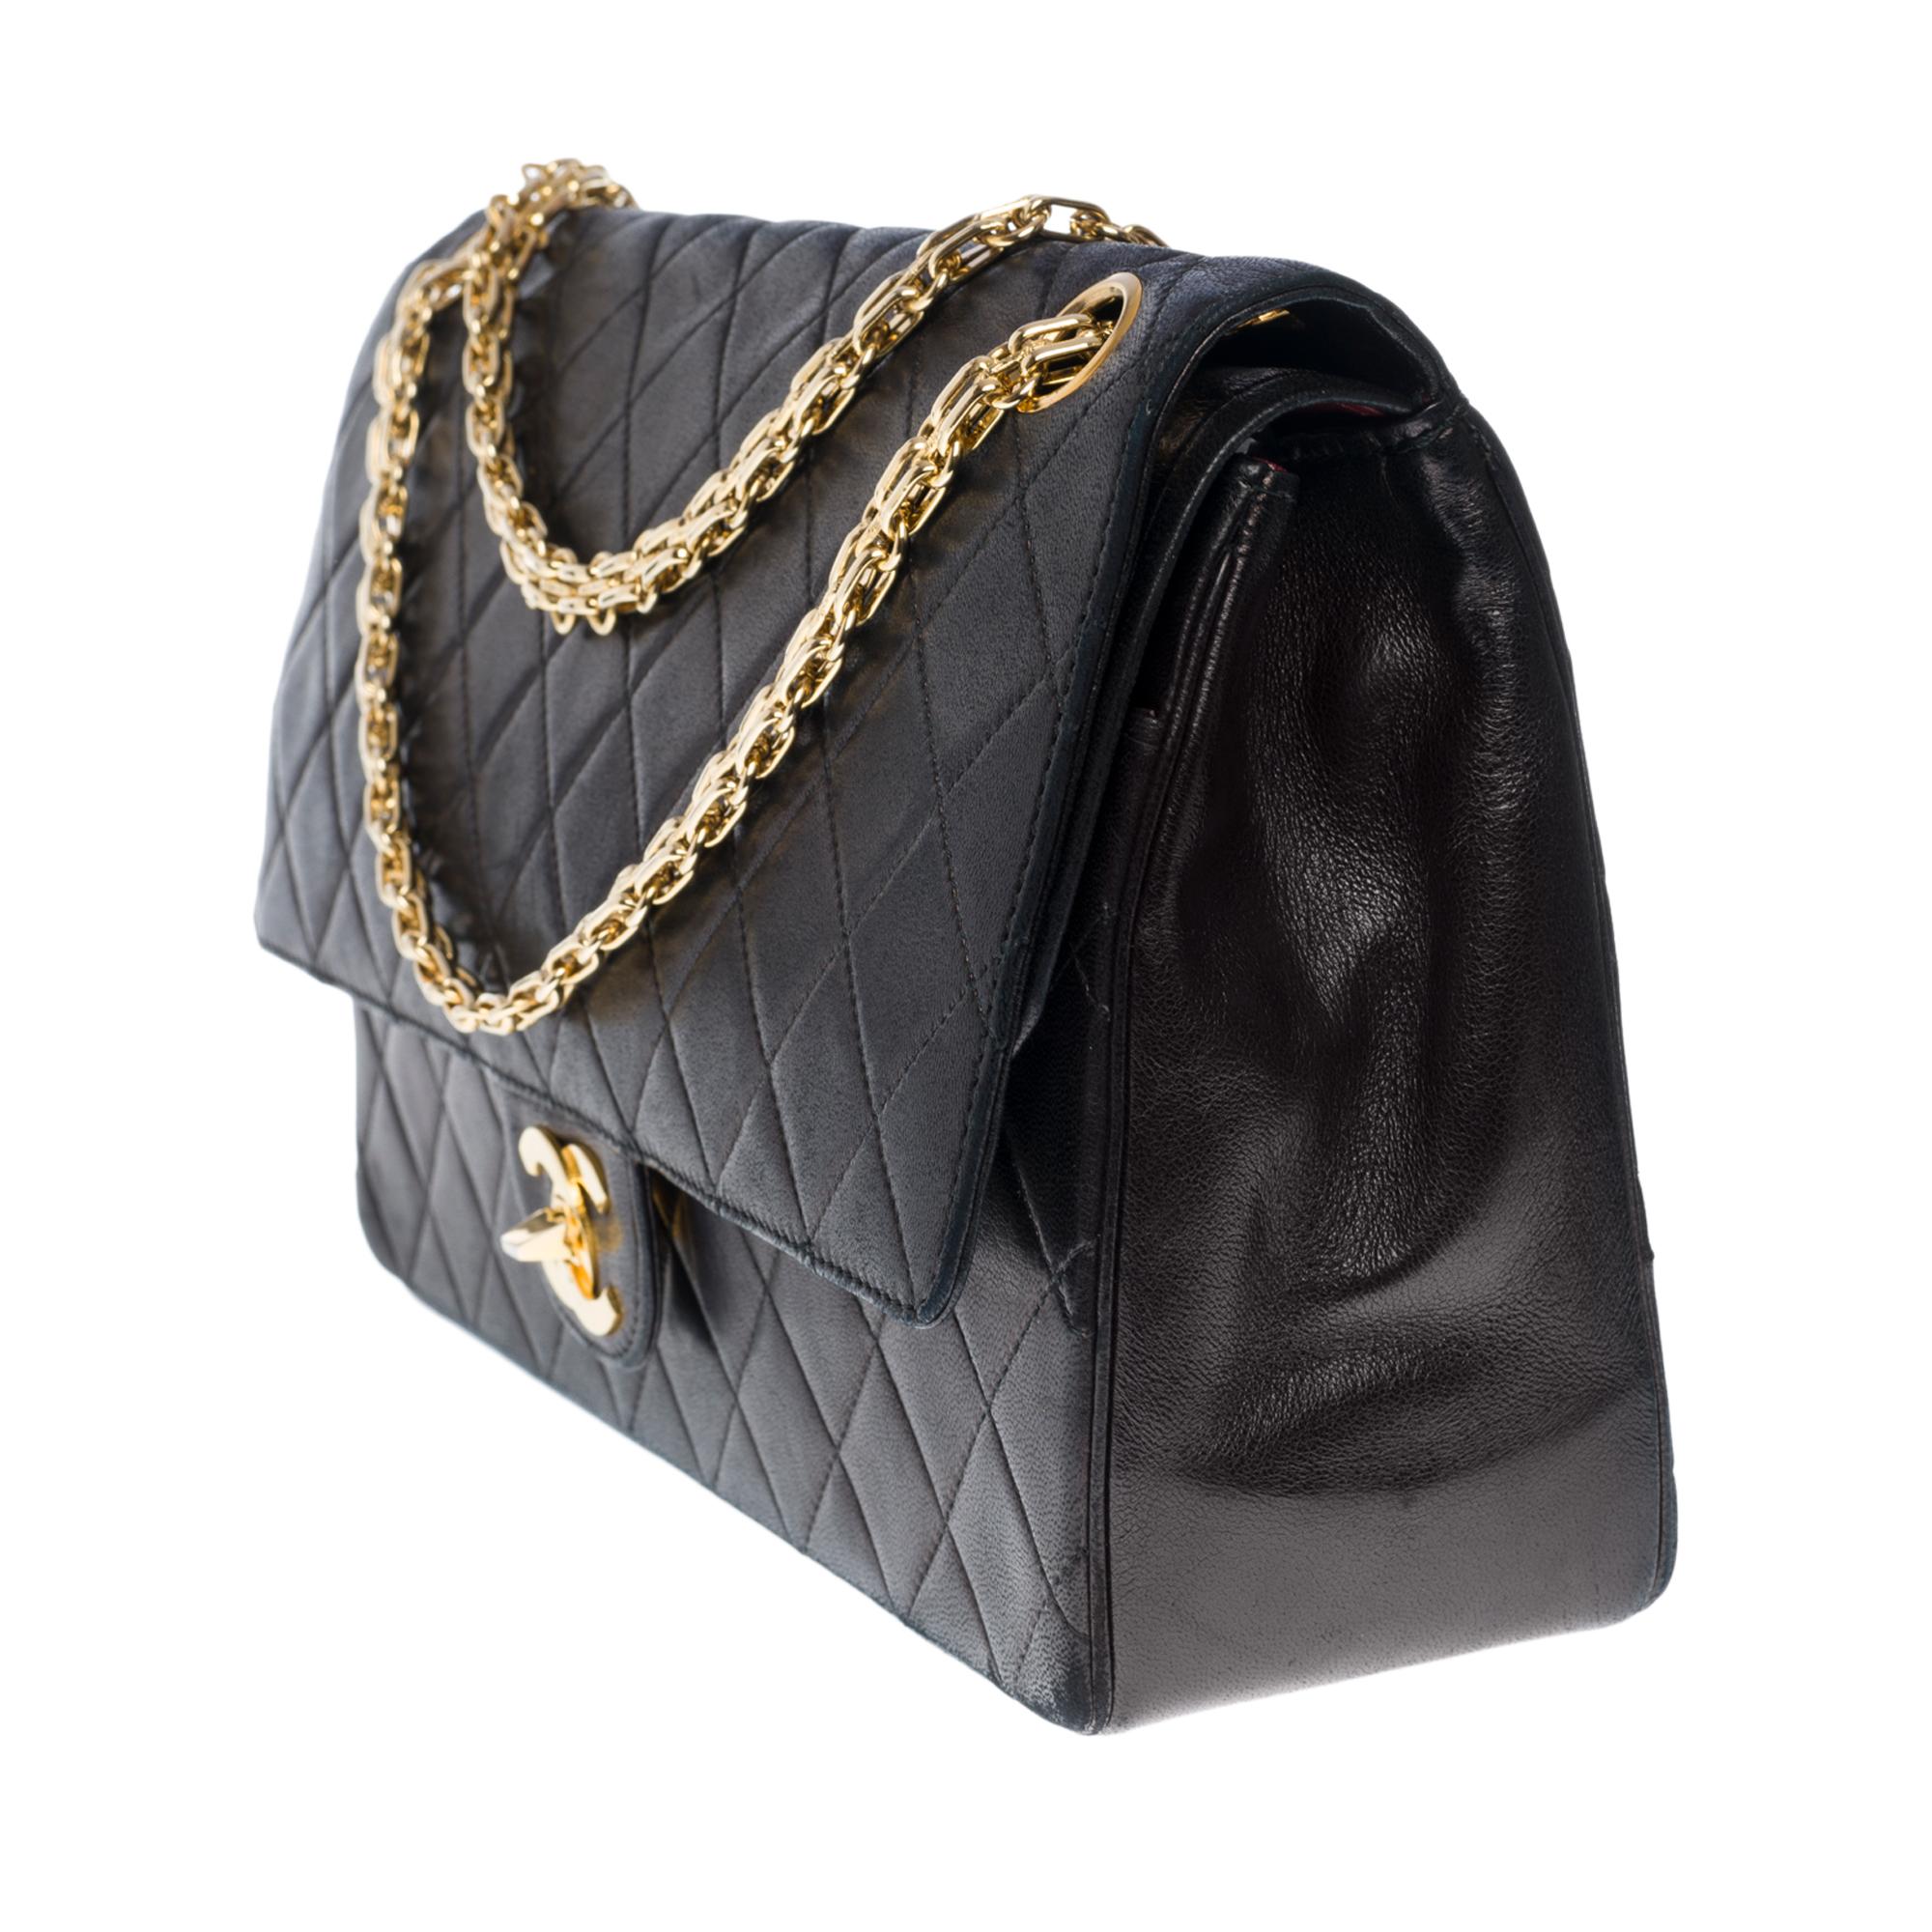 Black Chanel Timeless/Classic double Flap shoulder bag in black quilted lambskin, GHW